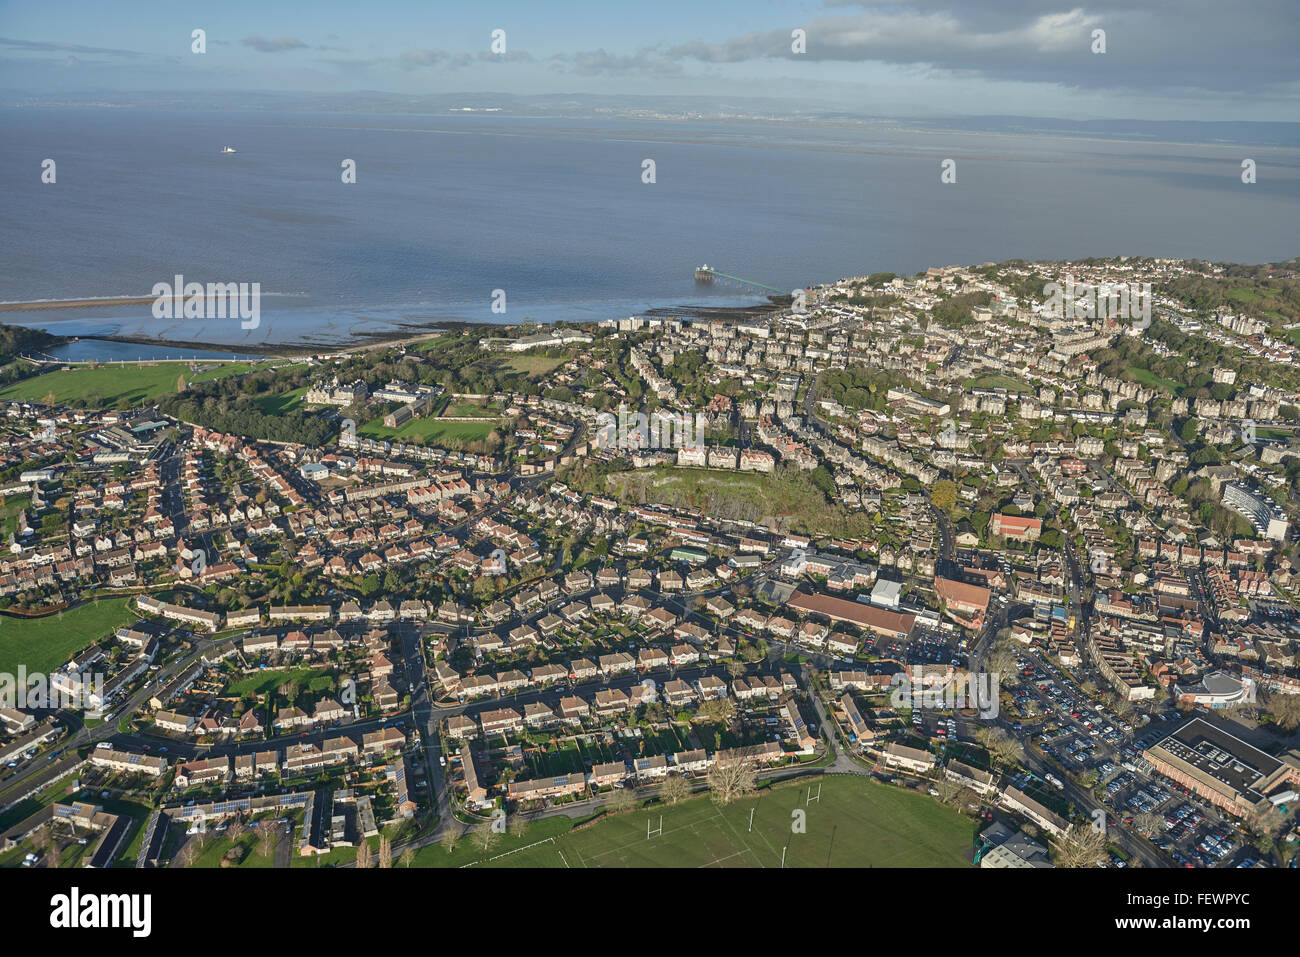 An aerial view of the Somerset town of Clevedon, looking across the Bristol Channel with Newport visible in the distance Stock Photo